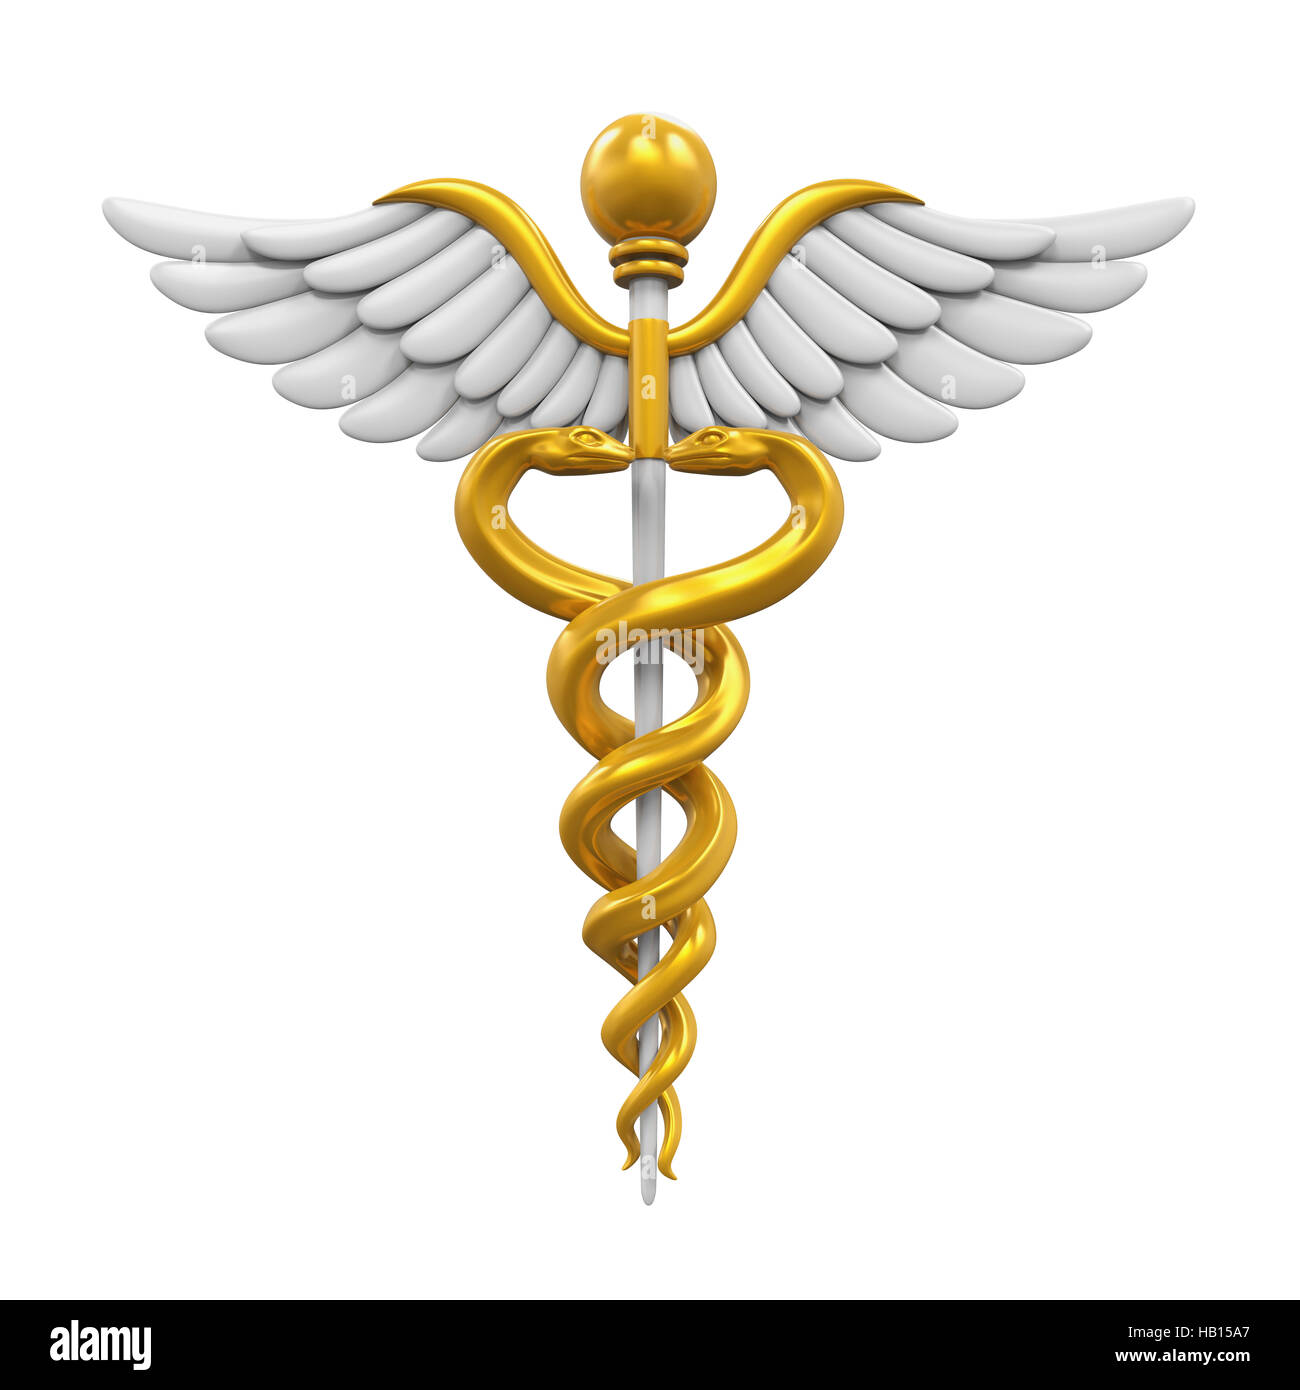 Caduceus Staff Of Hermes High Resolution Stock Photography and Images ...